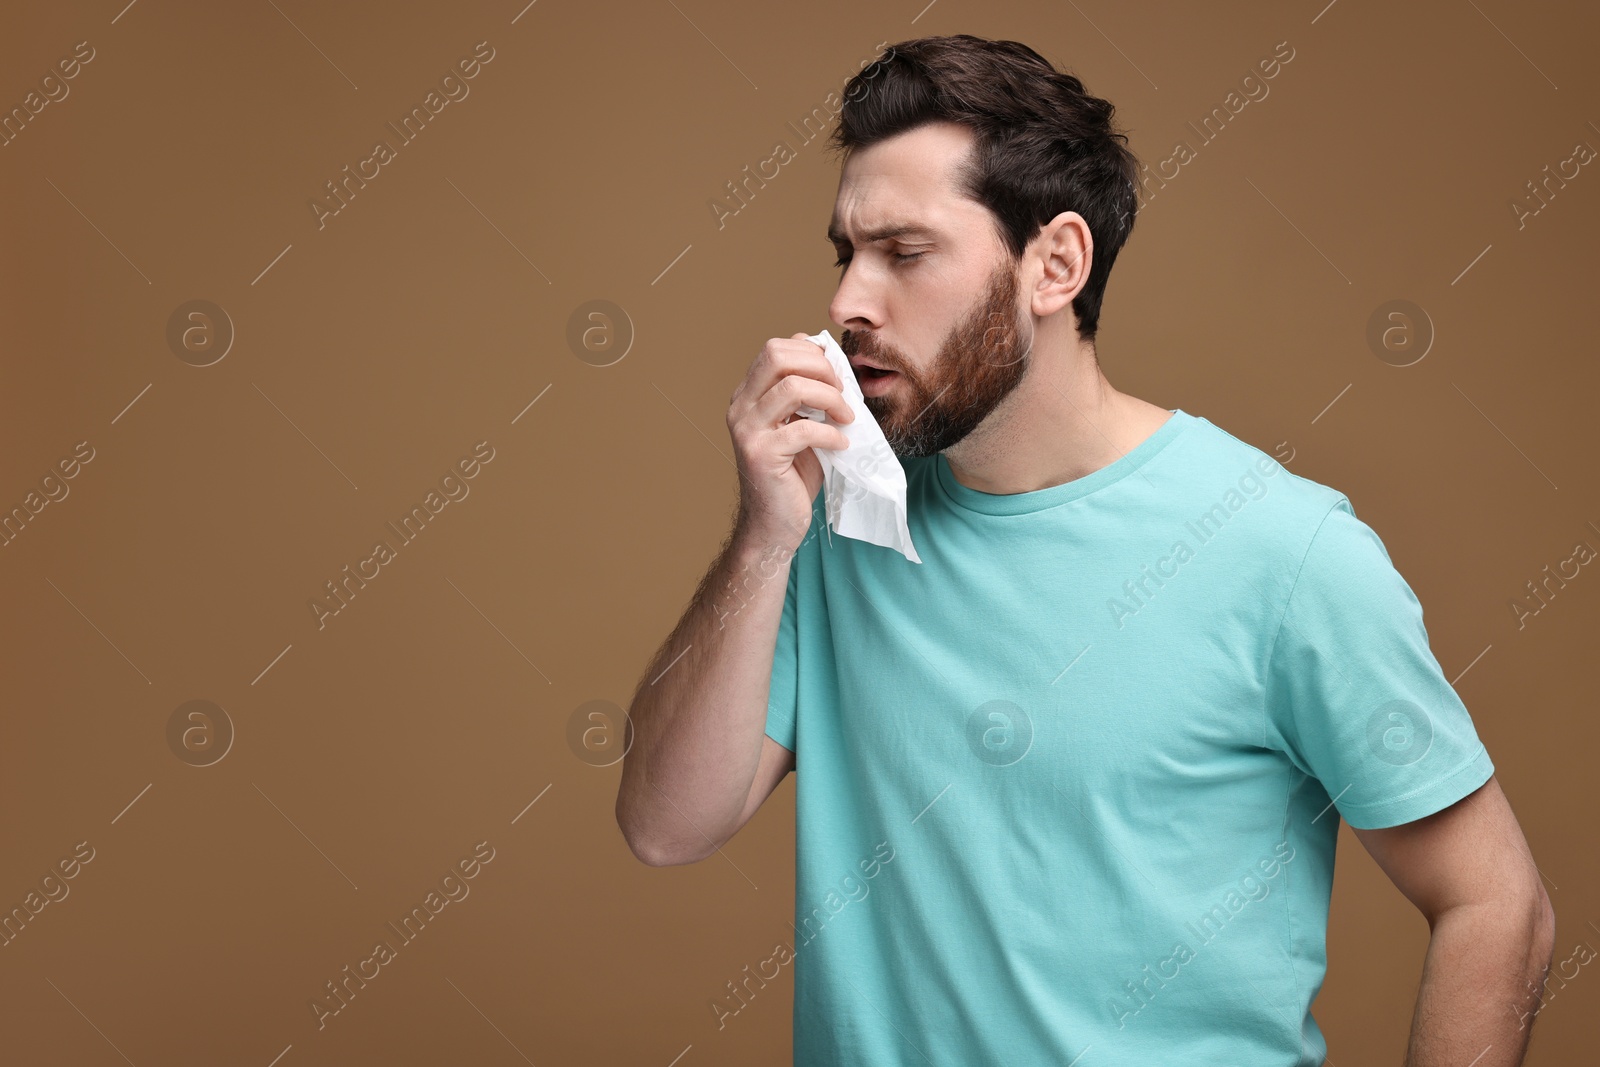 Photo of Sick man with tissue coughing on brown background, space for text